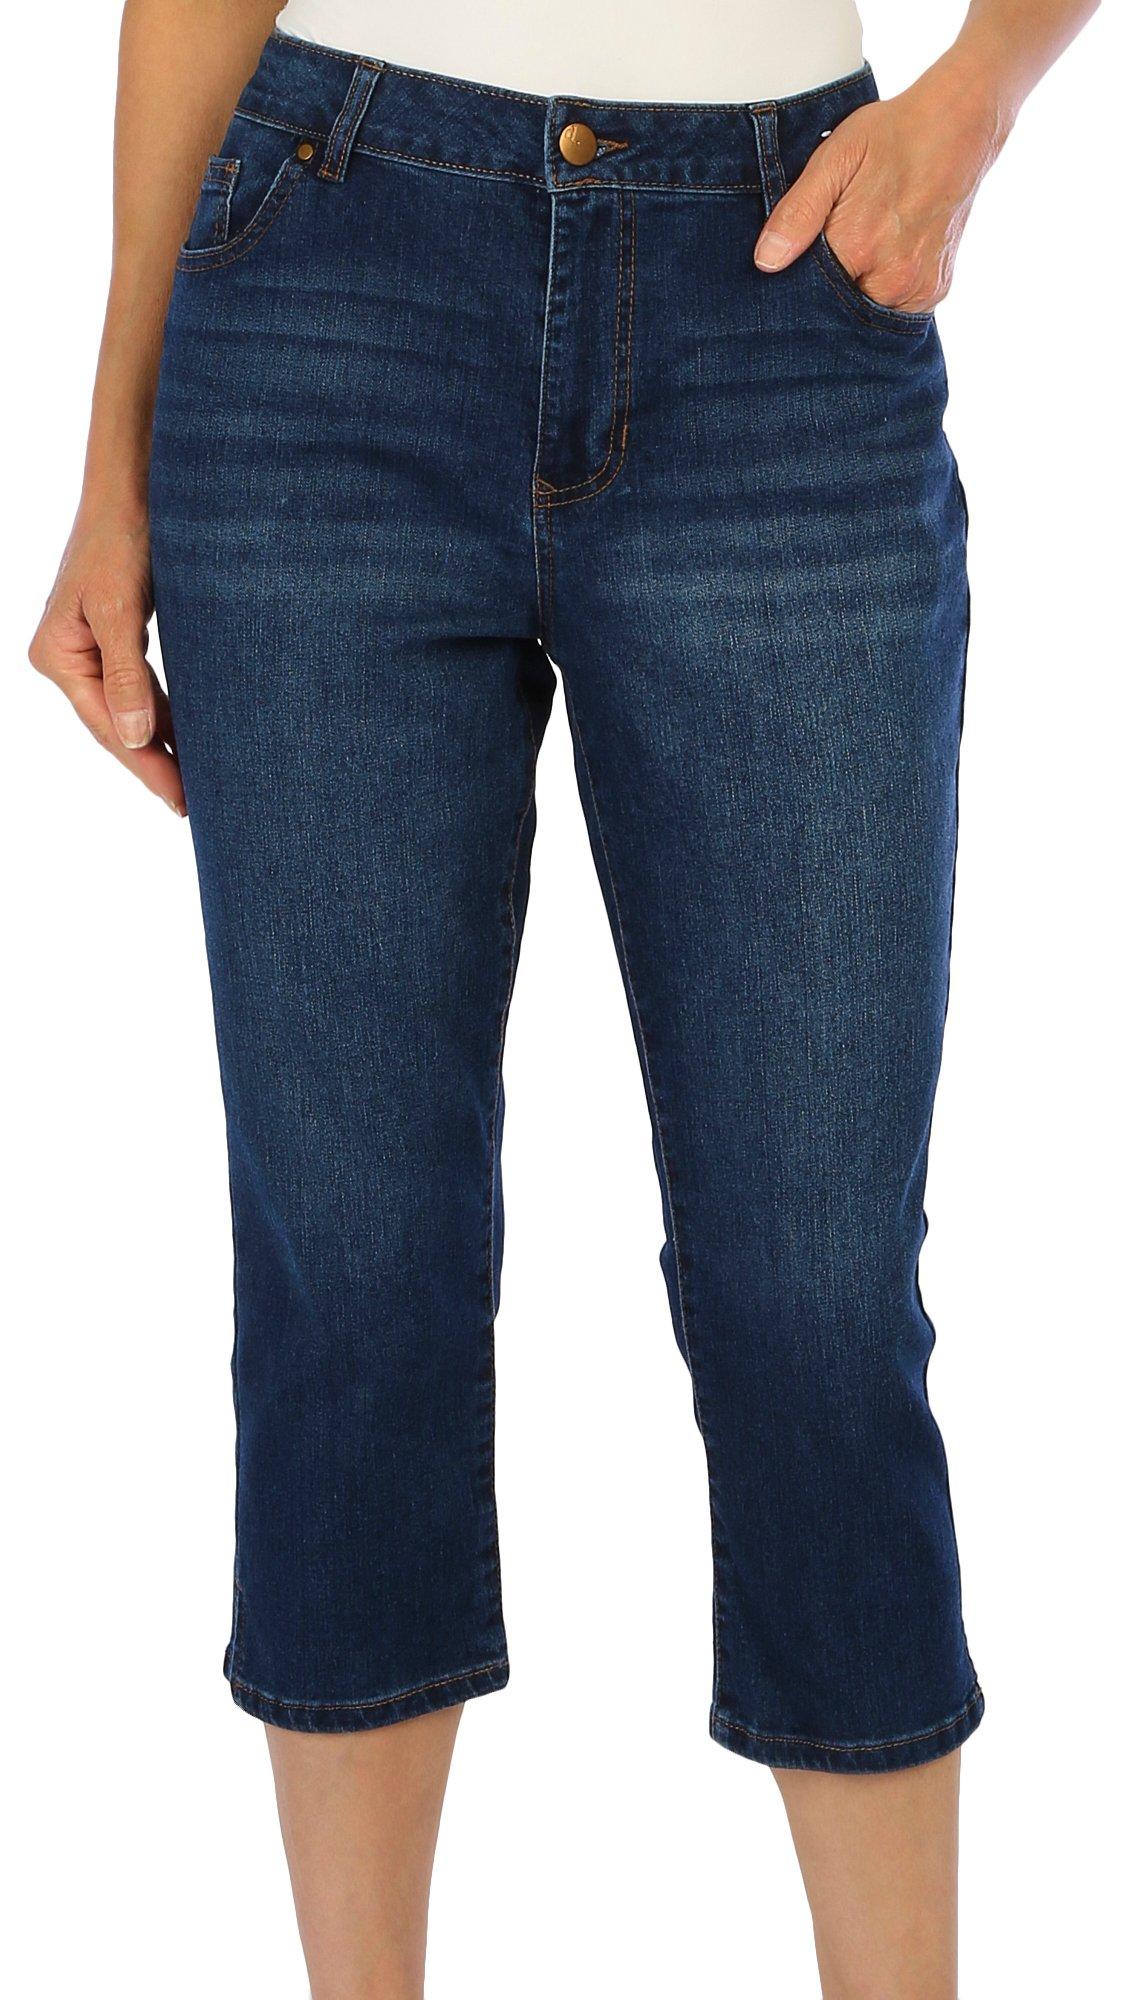 D. Jeans Womens 21 in. Pedal Pusher Capris